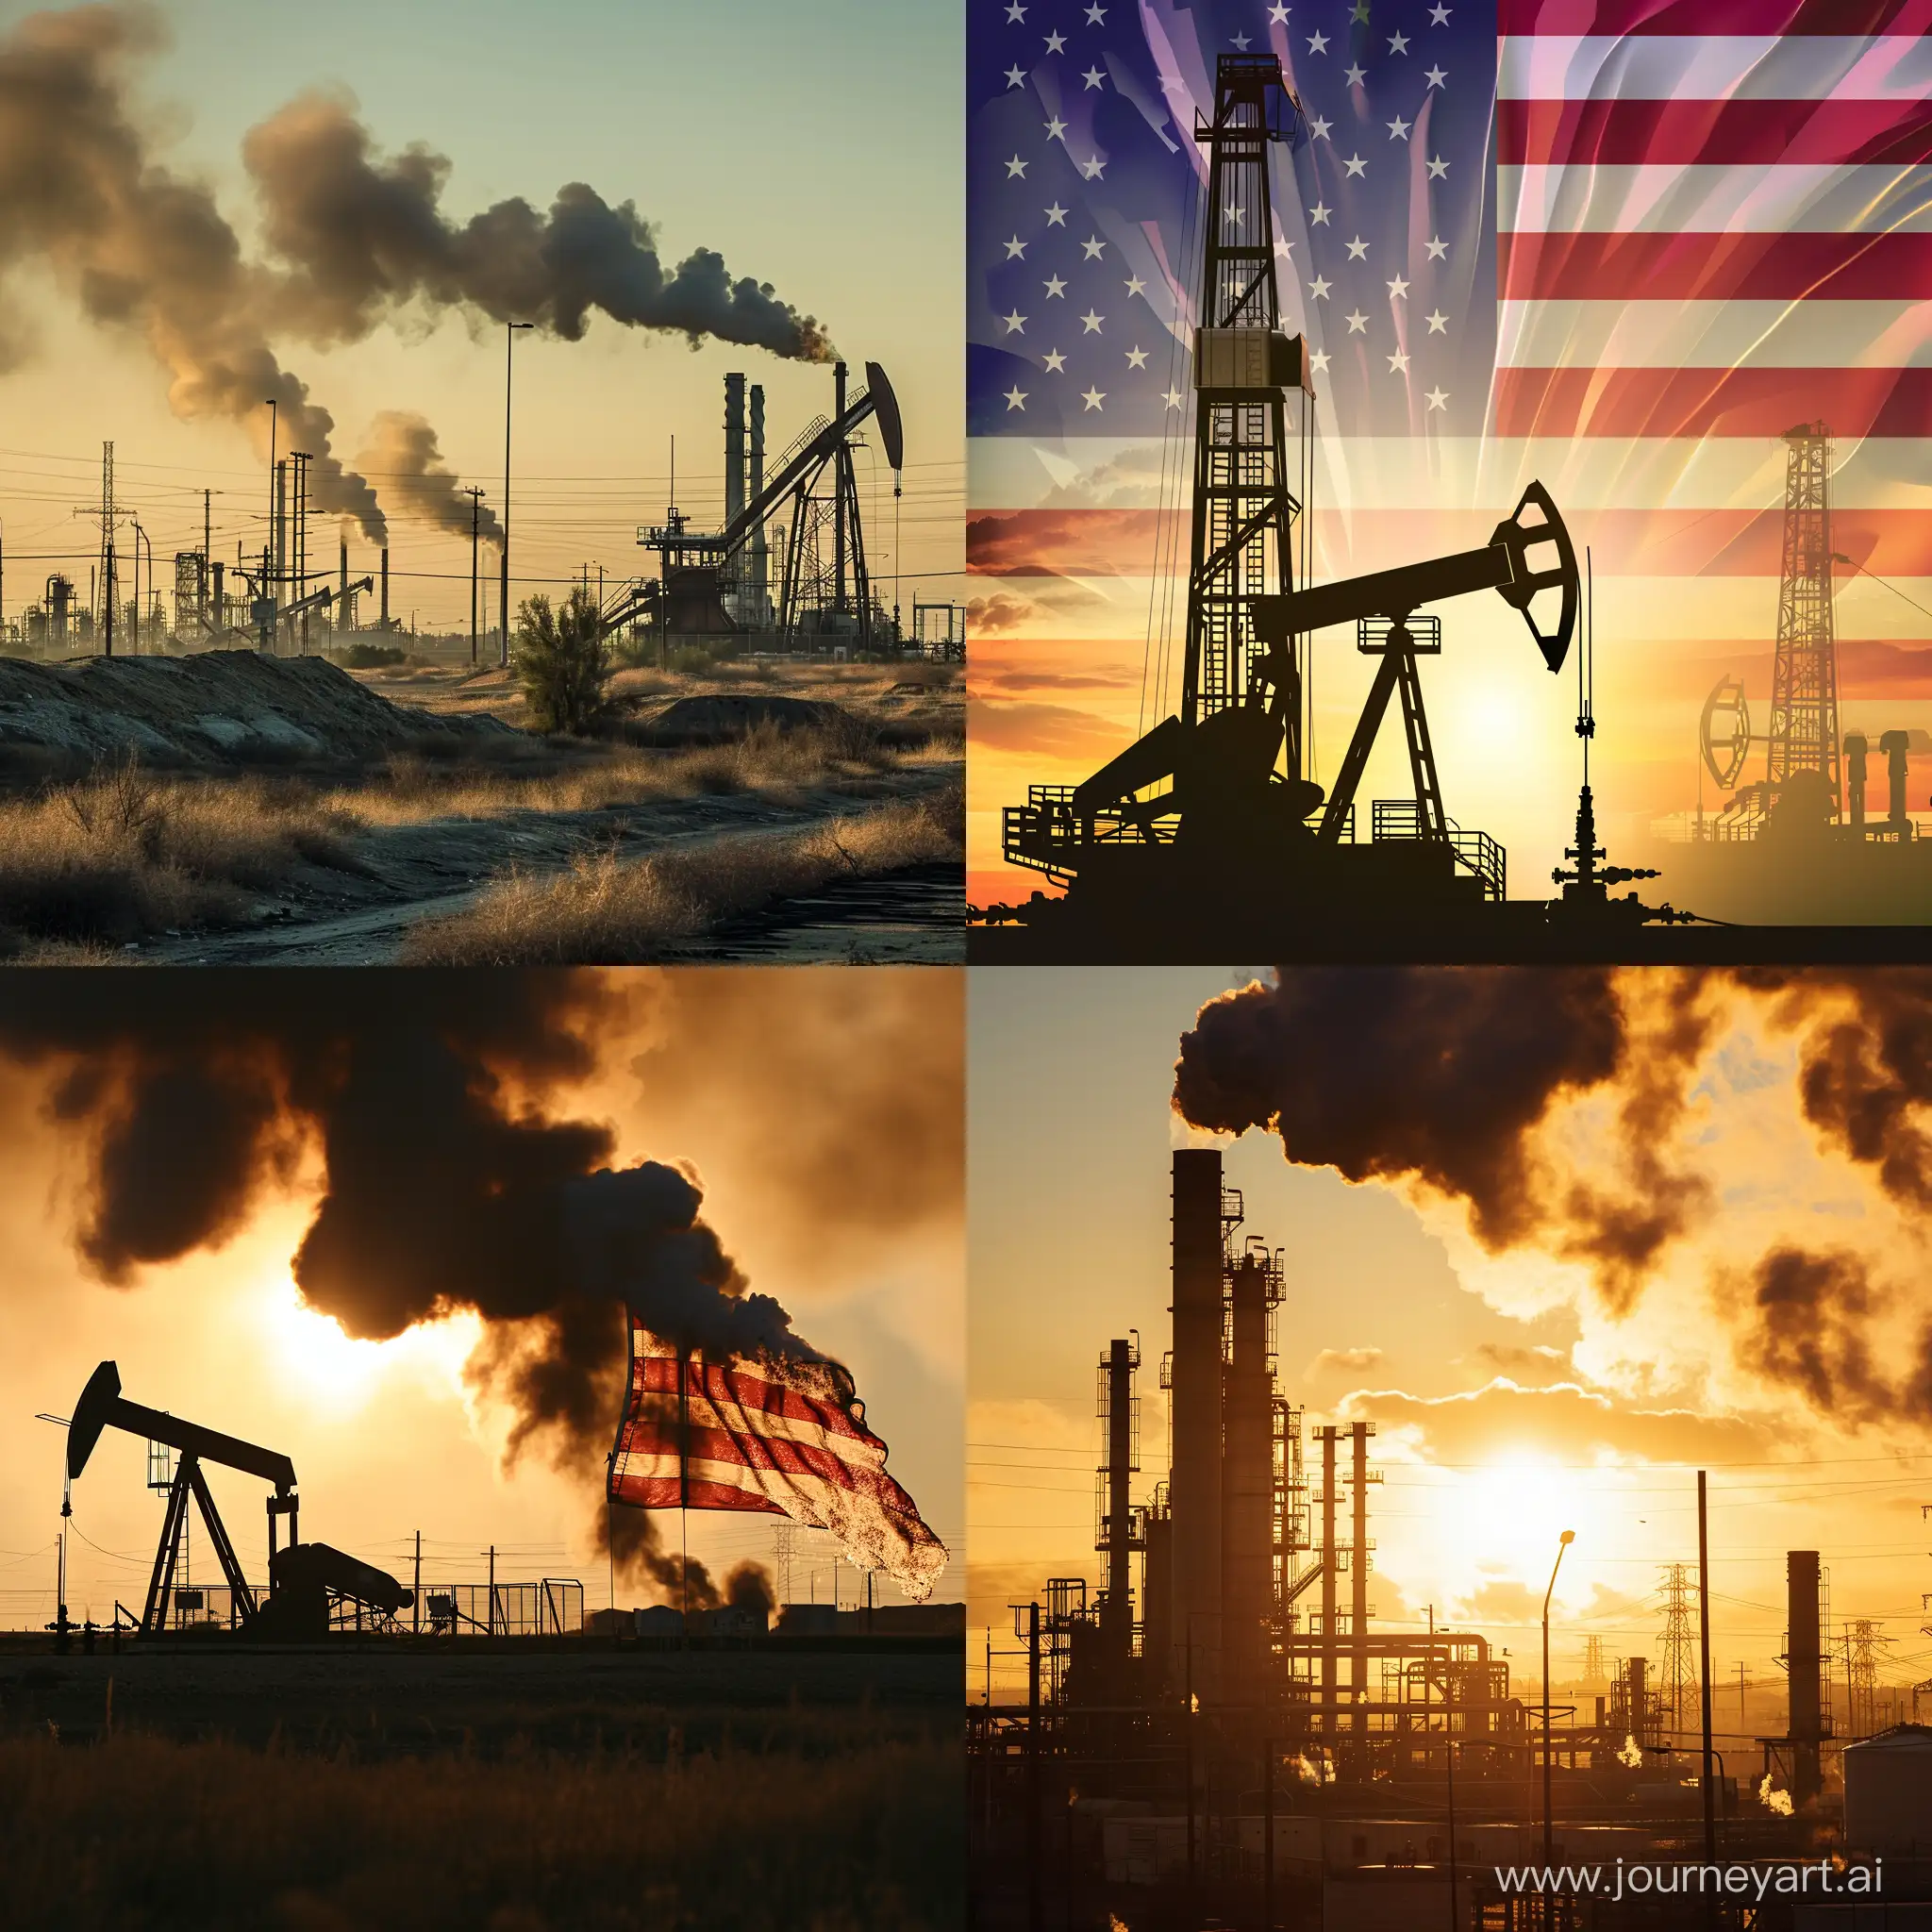 american over-reliance on fossil fuels